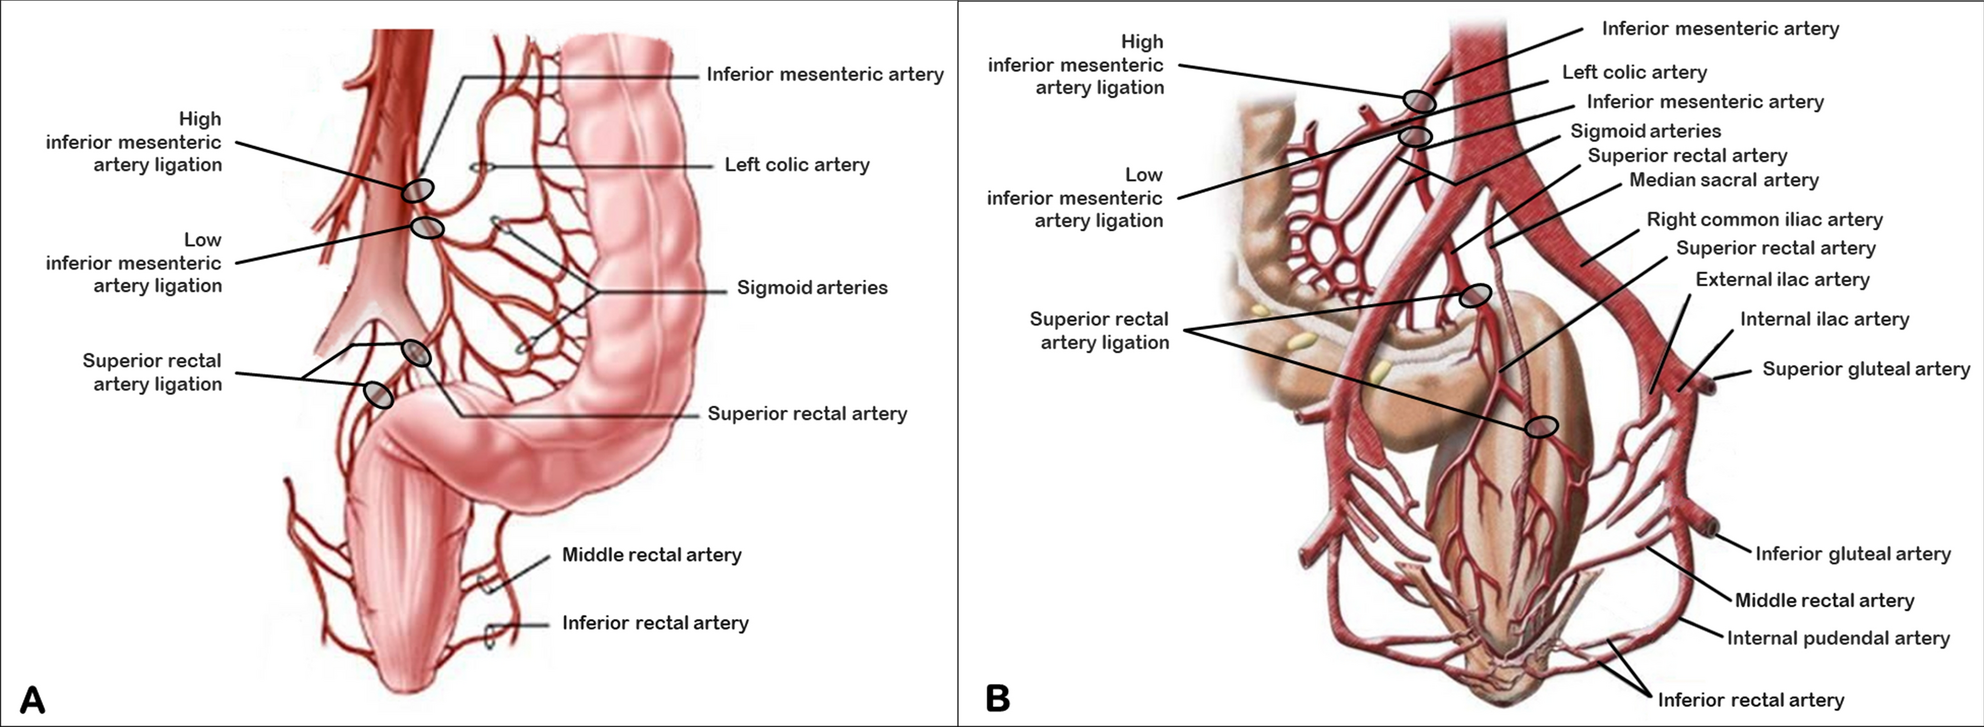 Laparoendoscopic single-site surgery for deep infiltrating